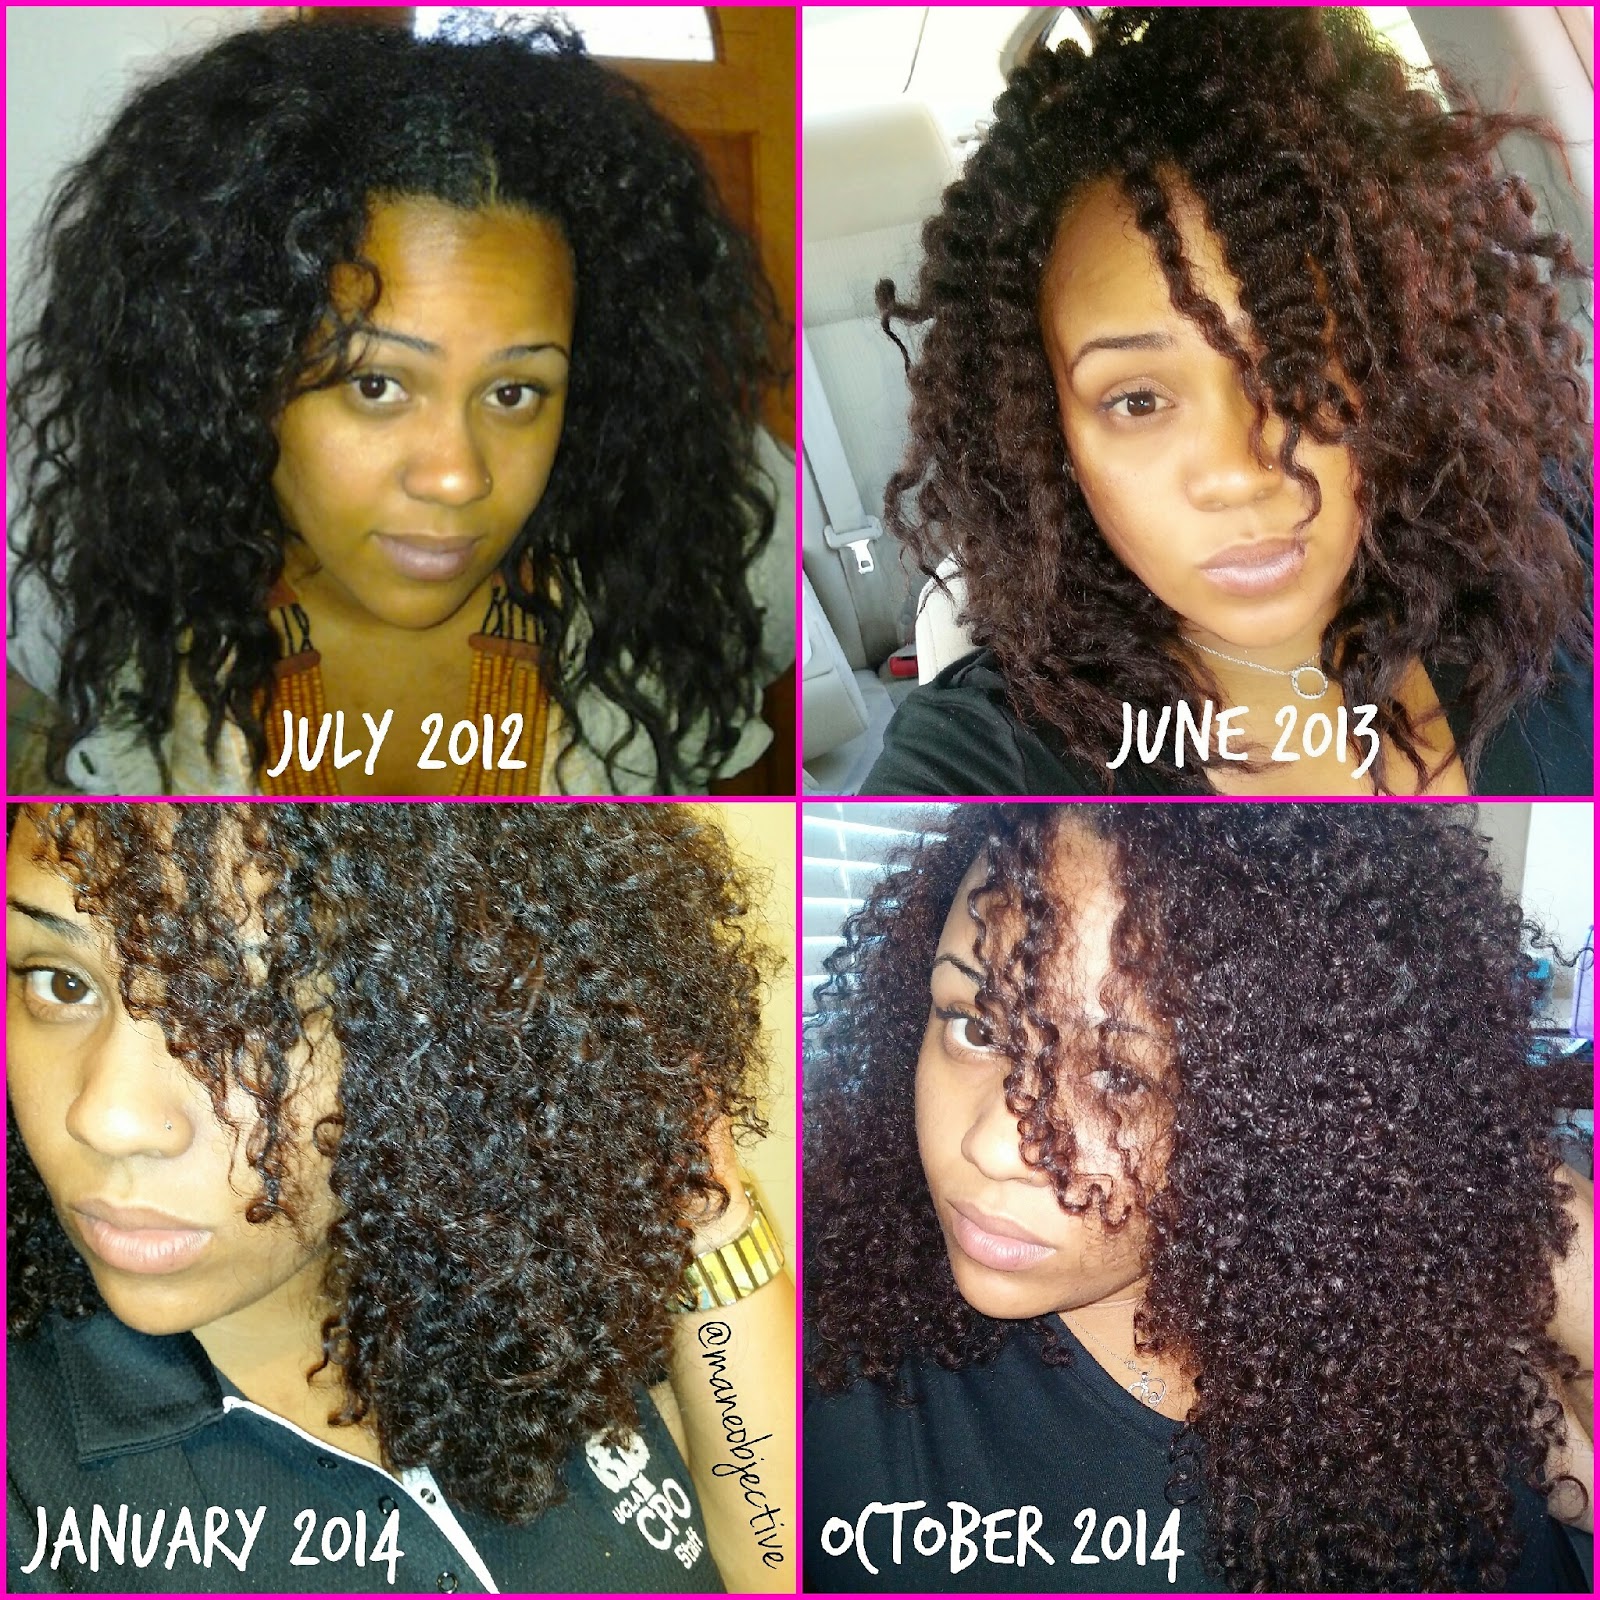 10 Critical Lessons I Learned During My 2-Year Transition to Natural Hair